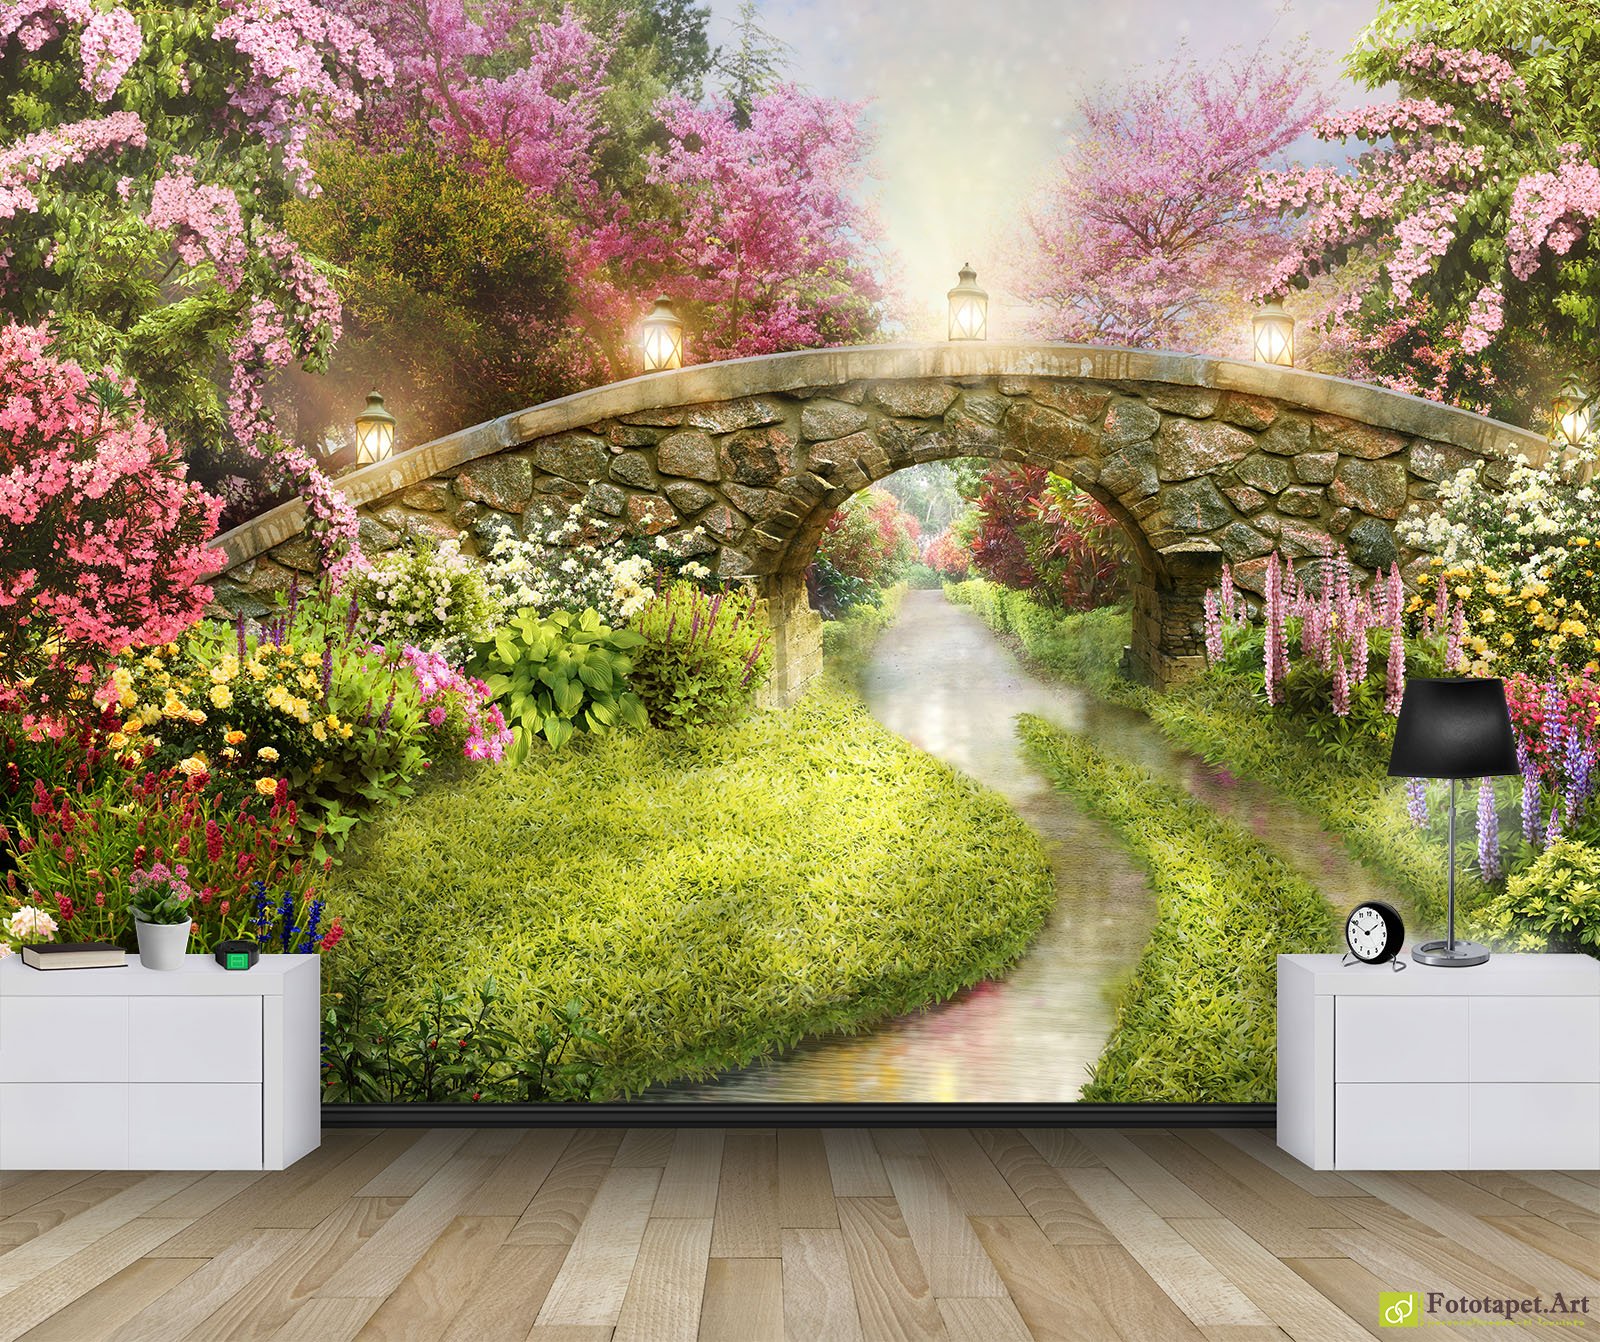 Nature Wallpaper & Wall Murals - Beautiful Landscape, river and bridge |   Digital Wall Murals for all tastes – from cities and map  motifs to designer creations and customised wall murals